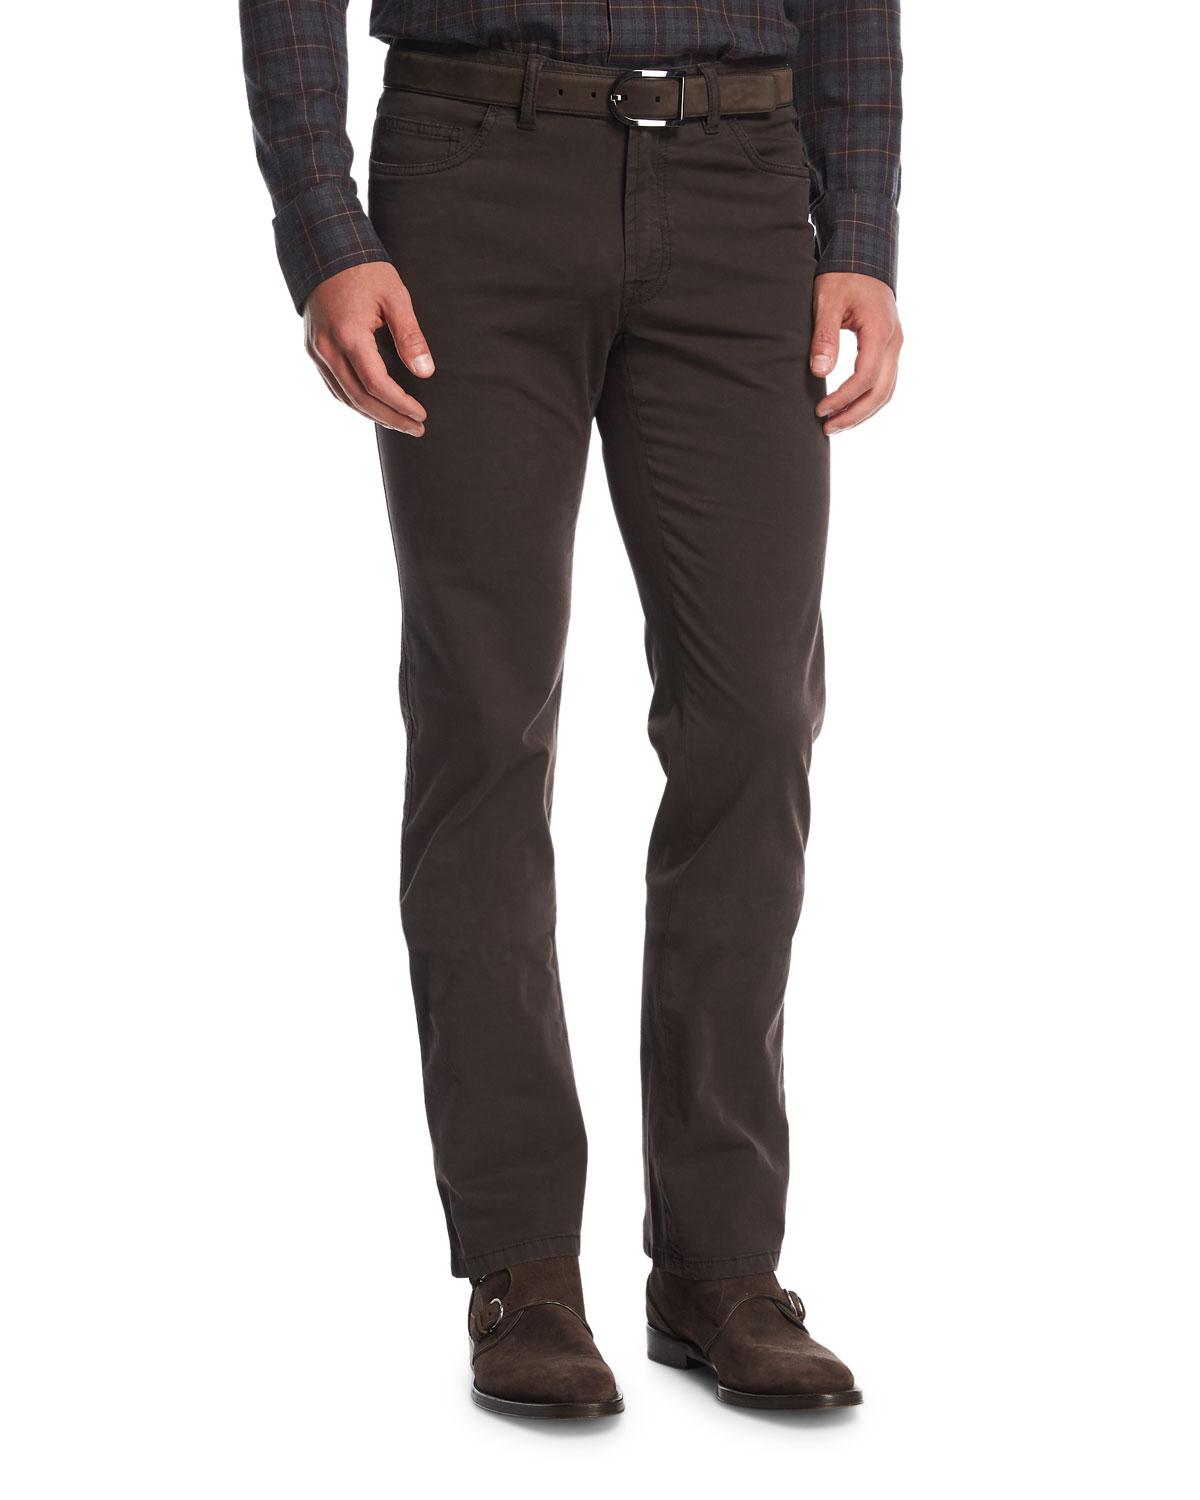 Lyst - Brioni Stretch-cotton Straight-leg Pants in Brown for Men